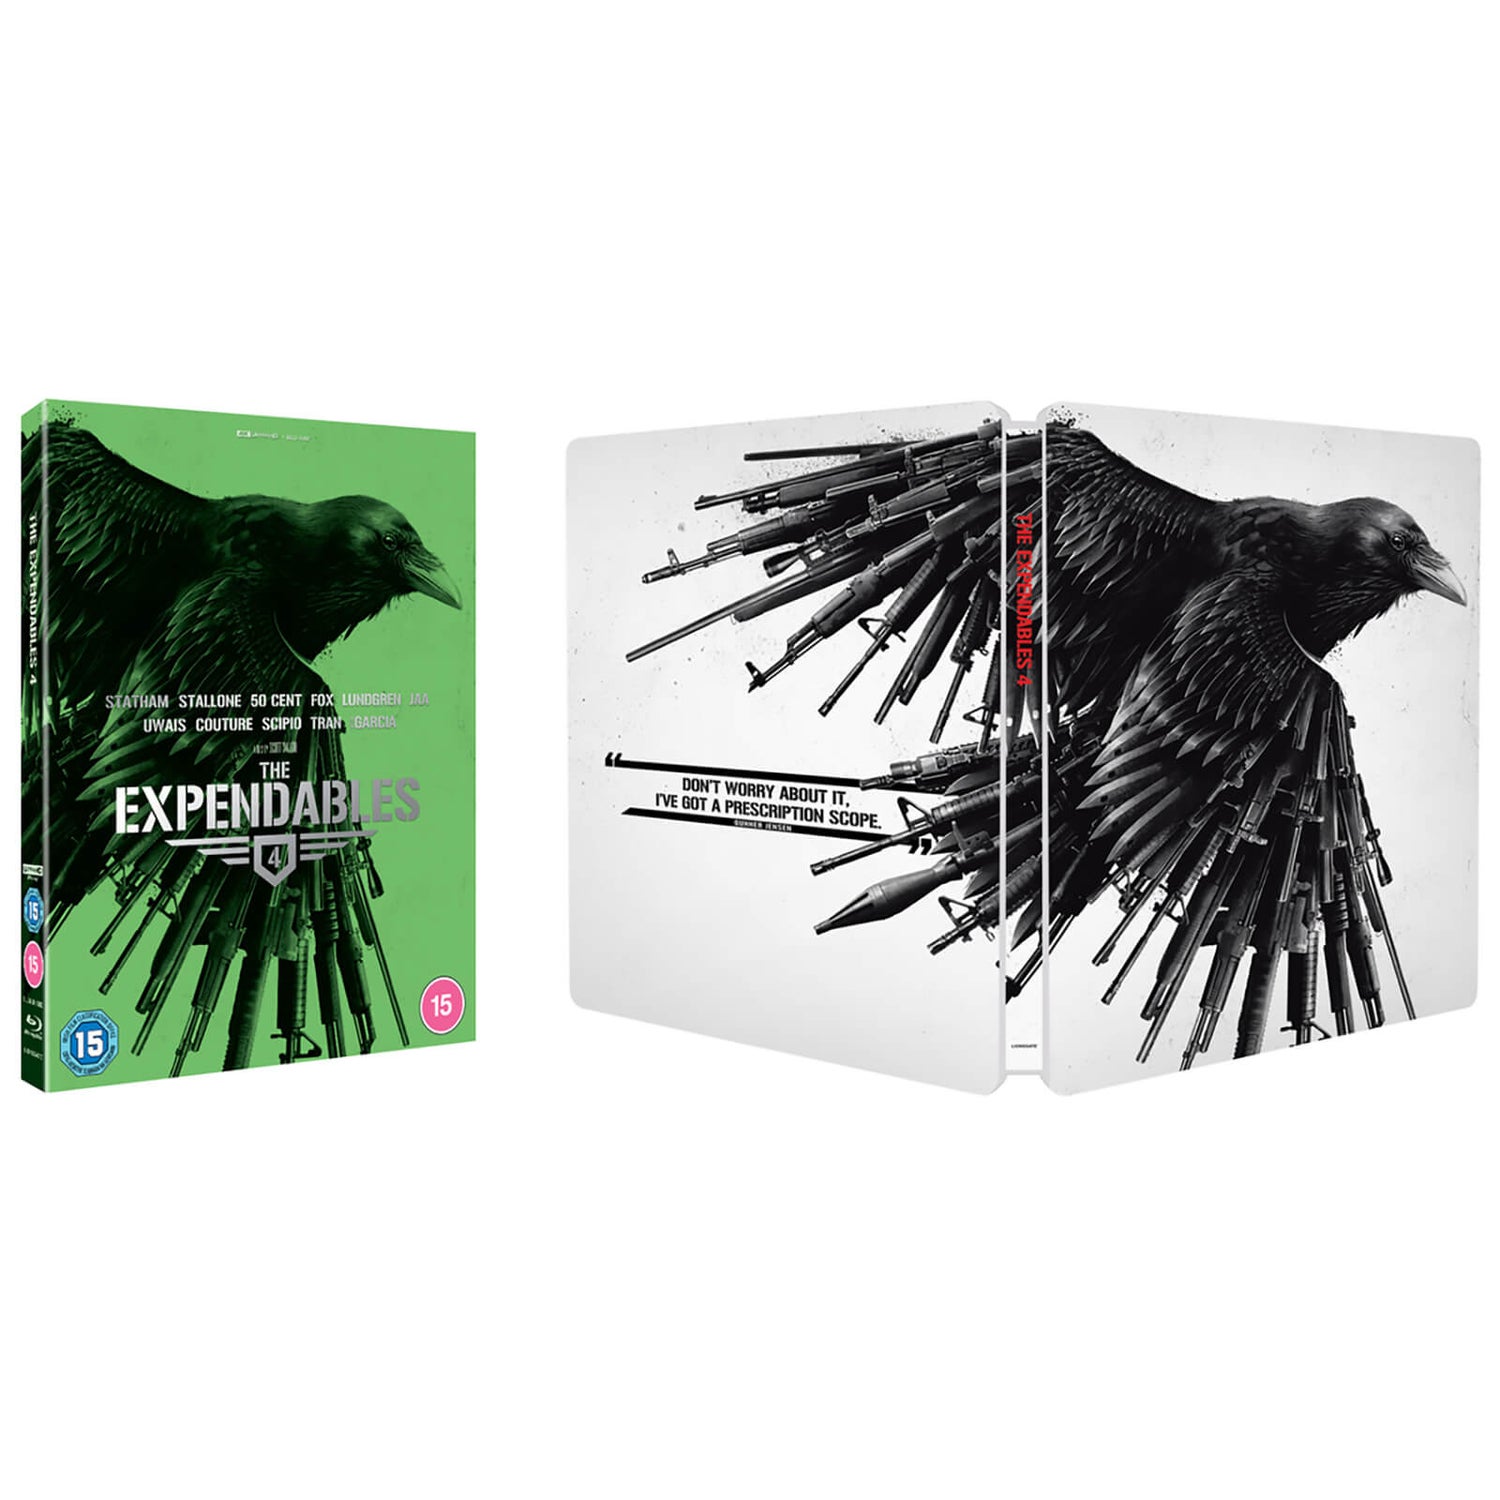 The Expendables 4 4K Ultra HD Steelbook